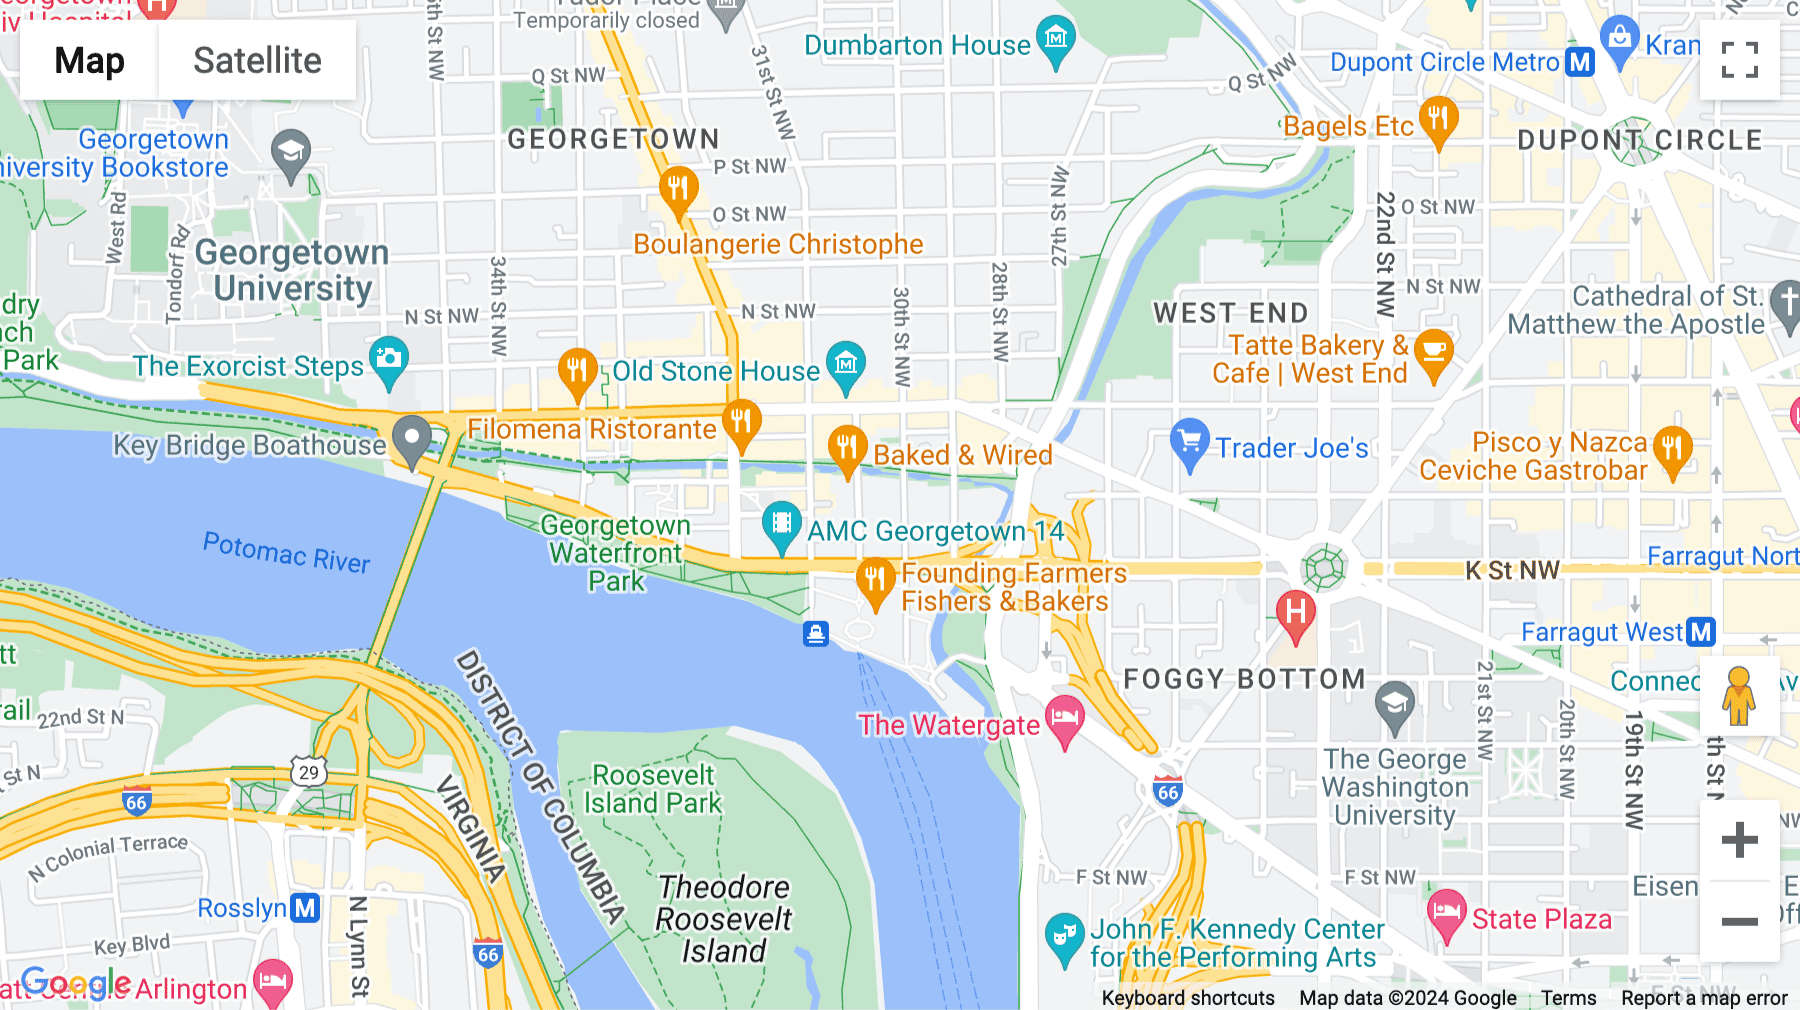 Click for interative map of Georgetown Center, 1050 30th Street, NW, Washington DC